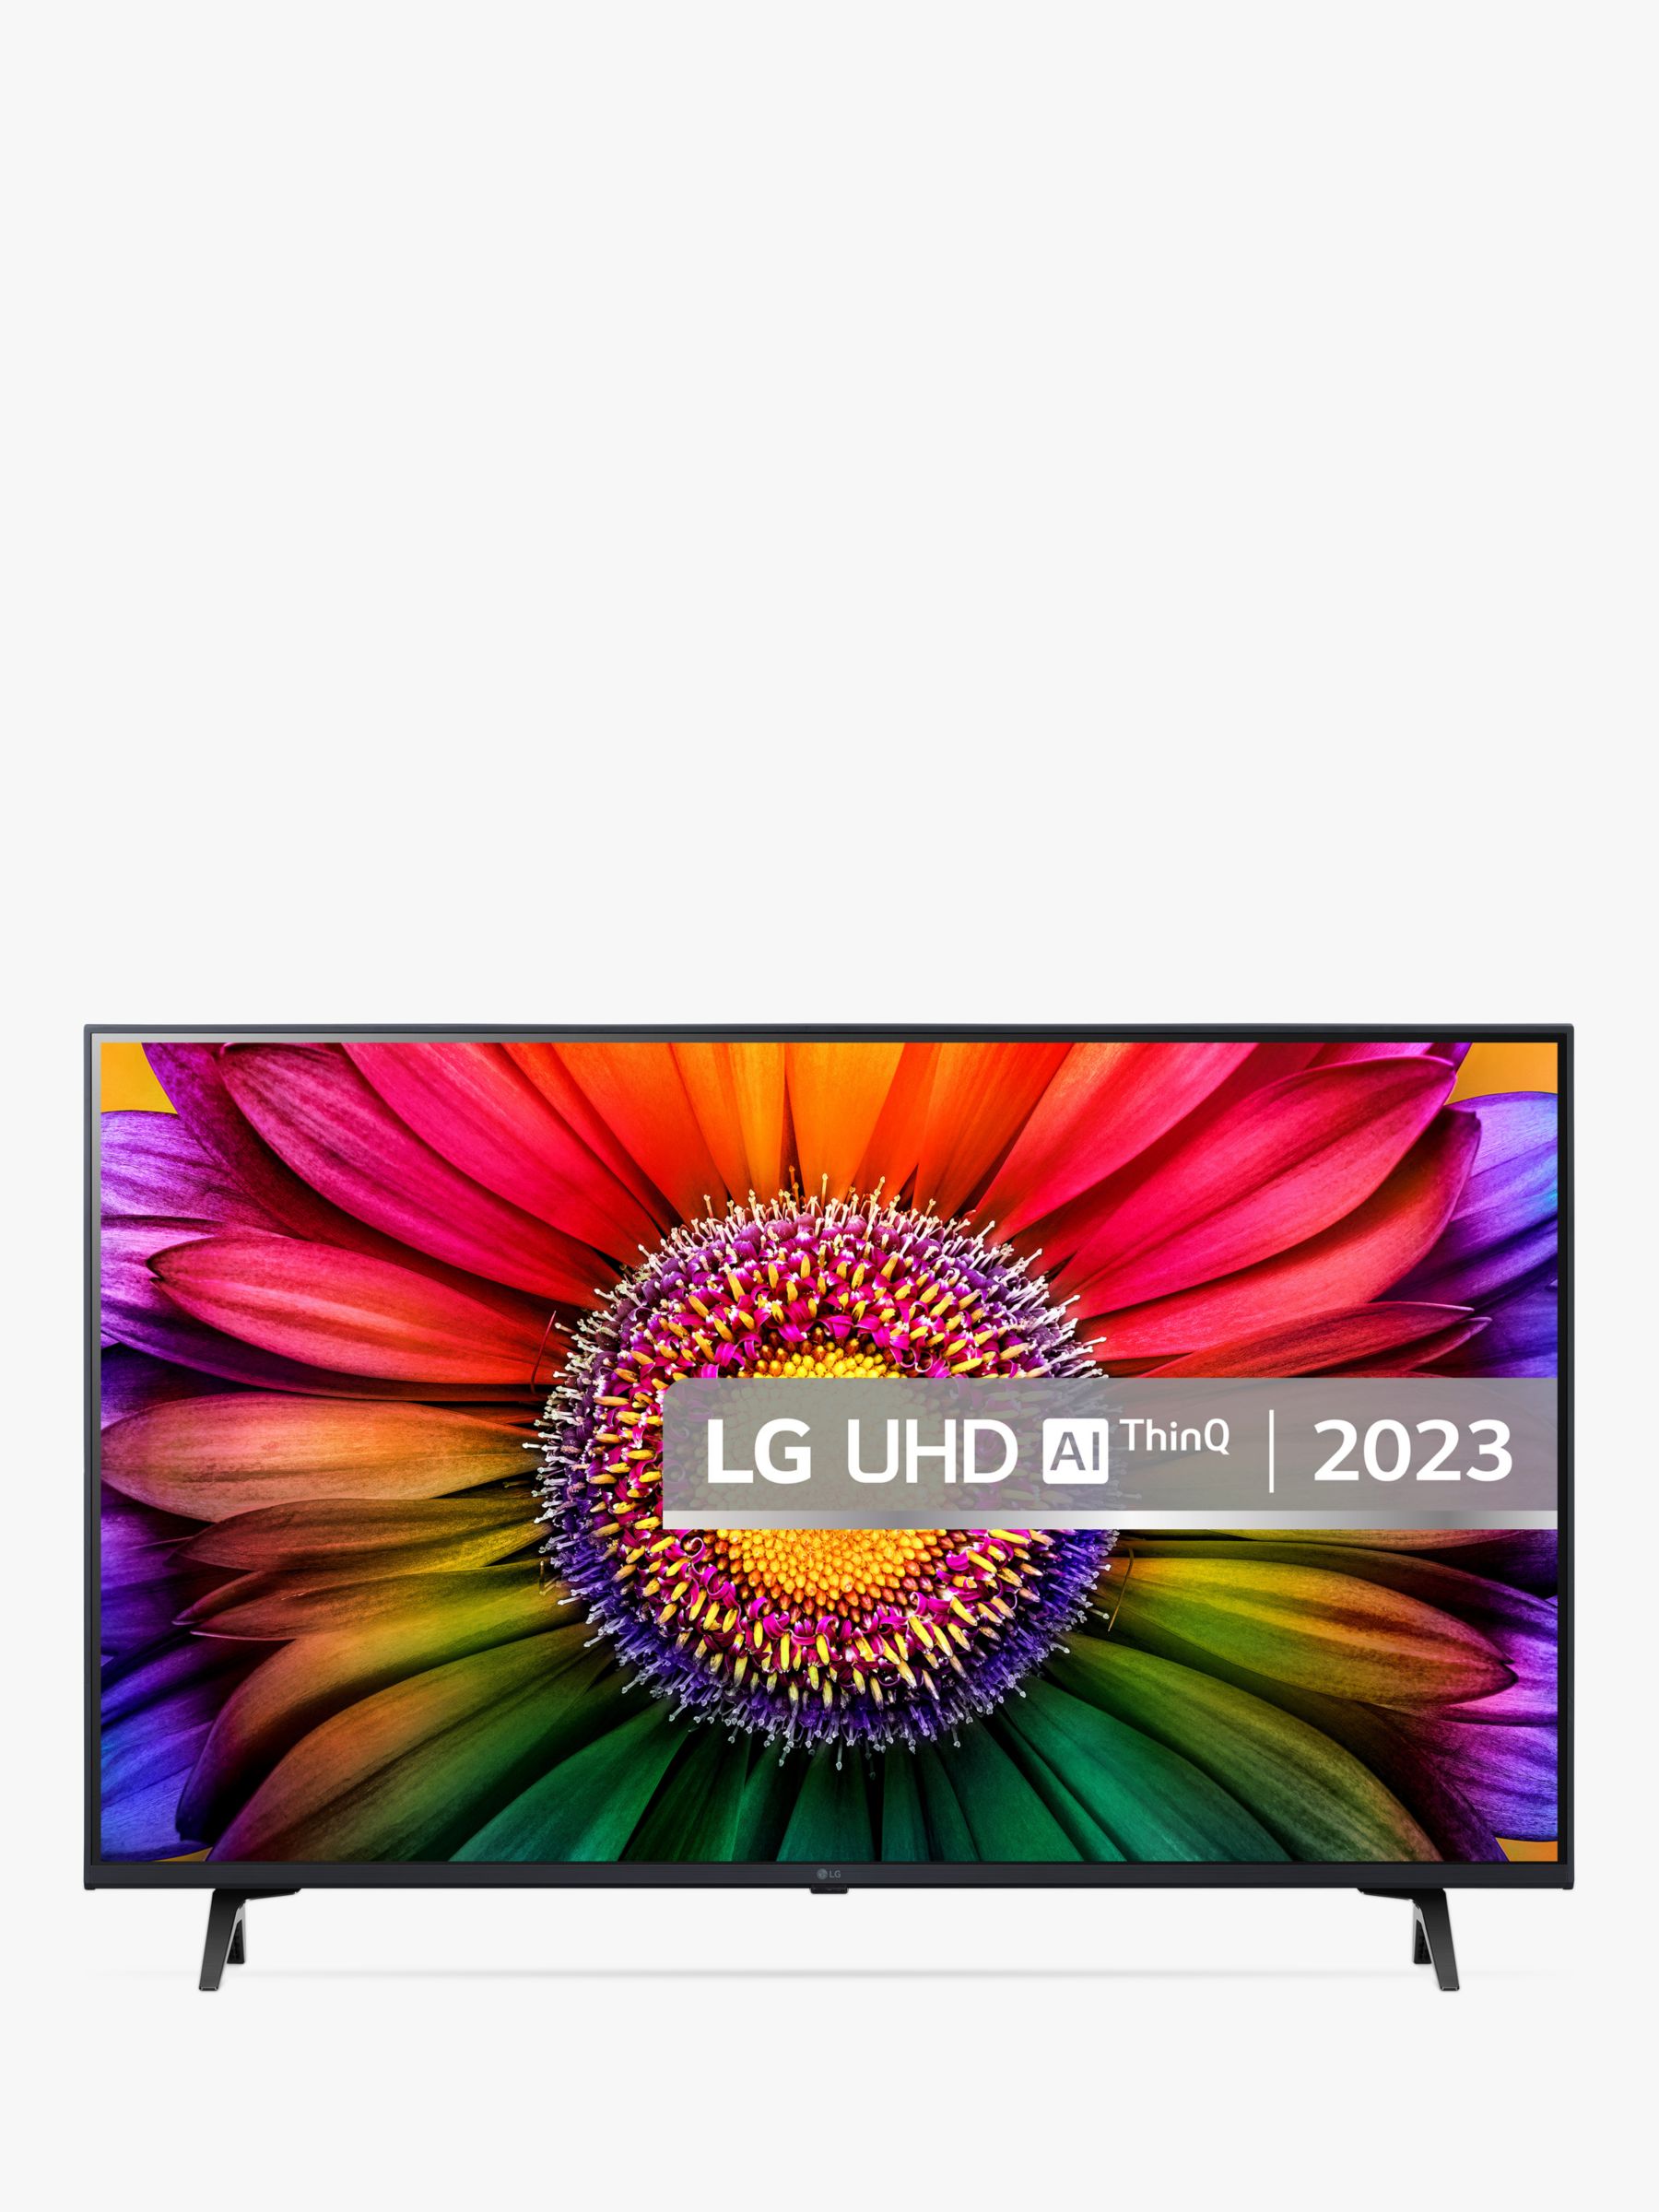 LG 43 Inch Smart Full HD TV With Surround Sound